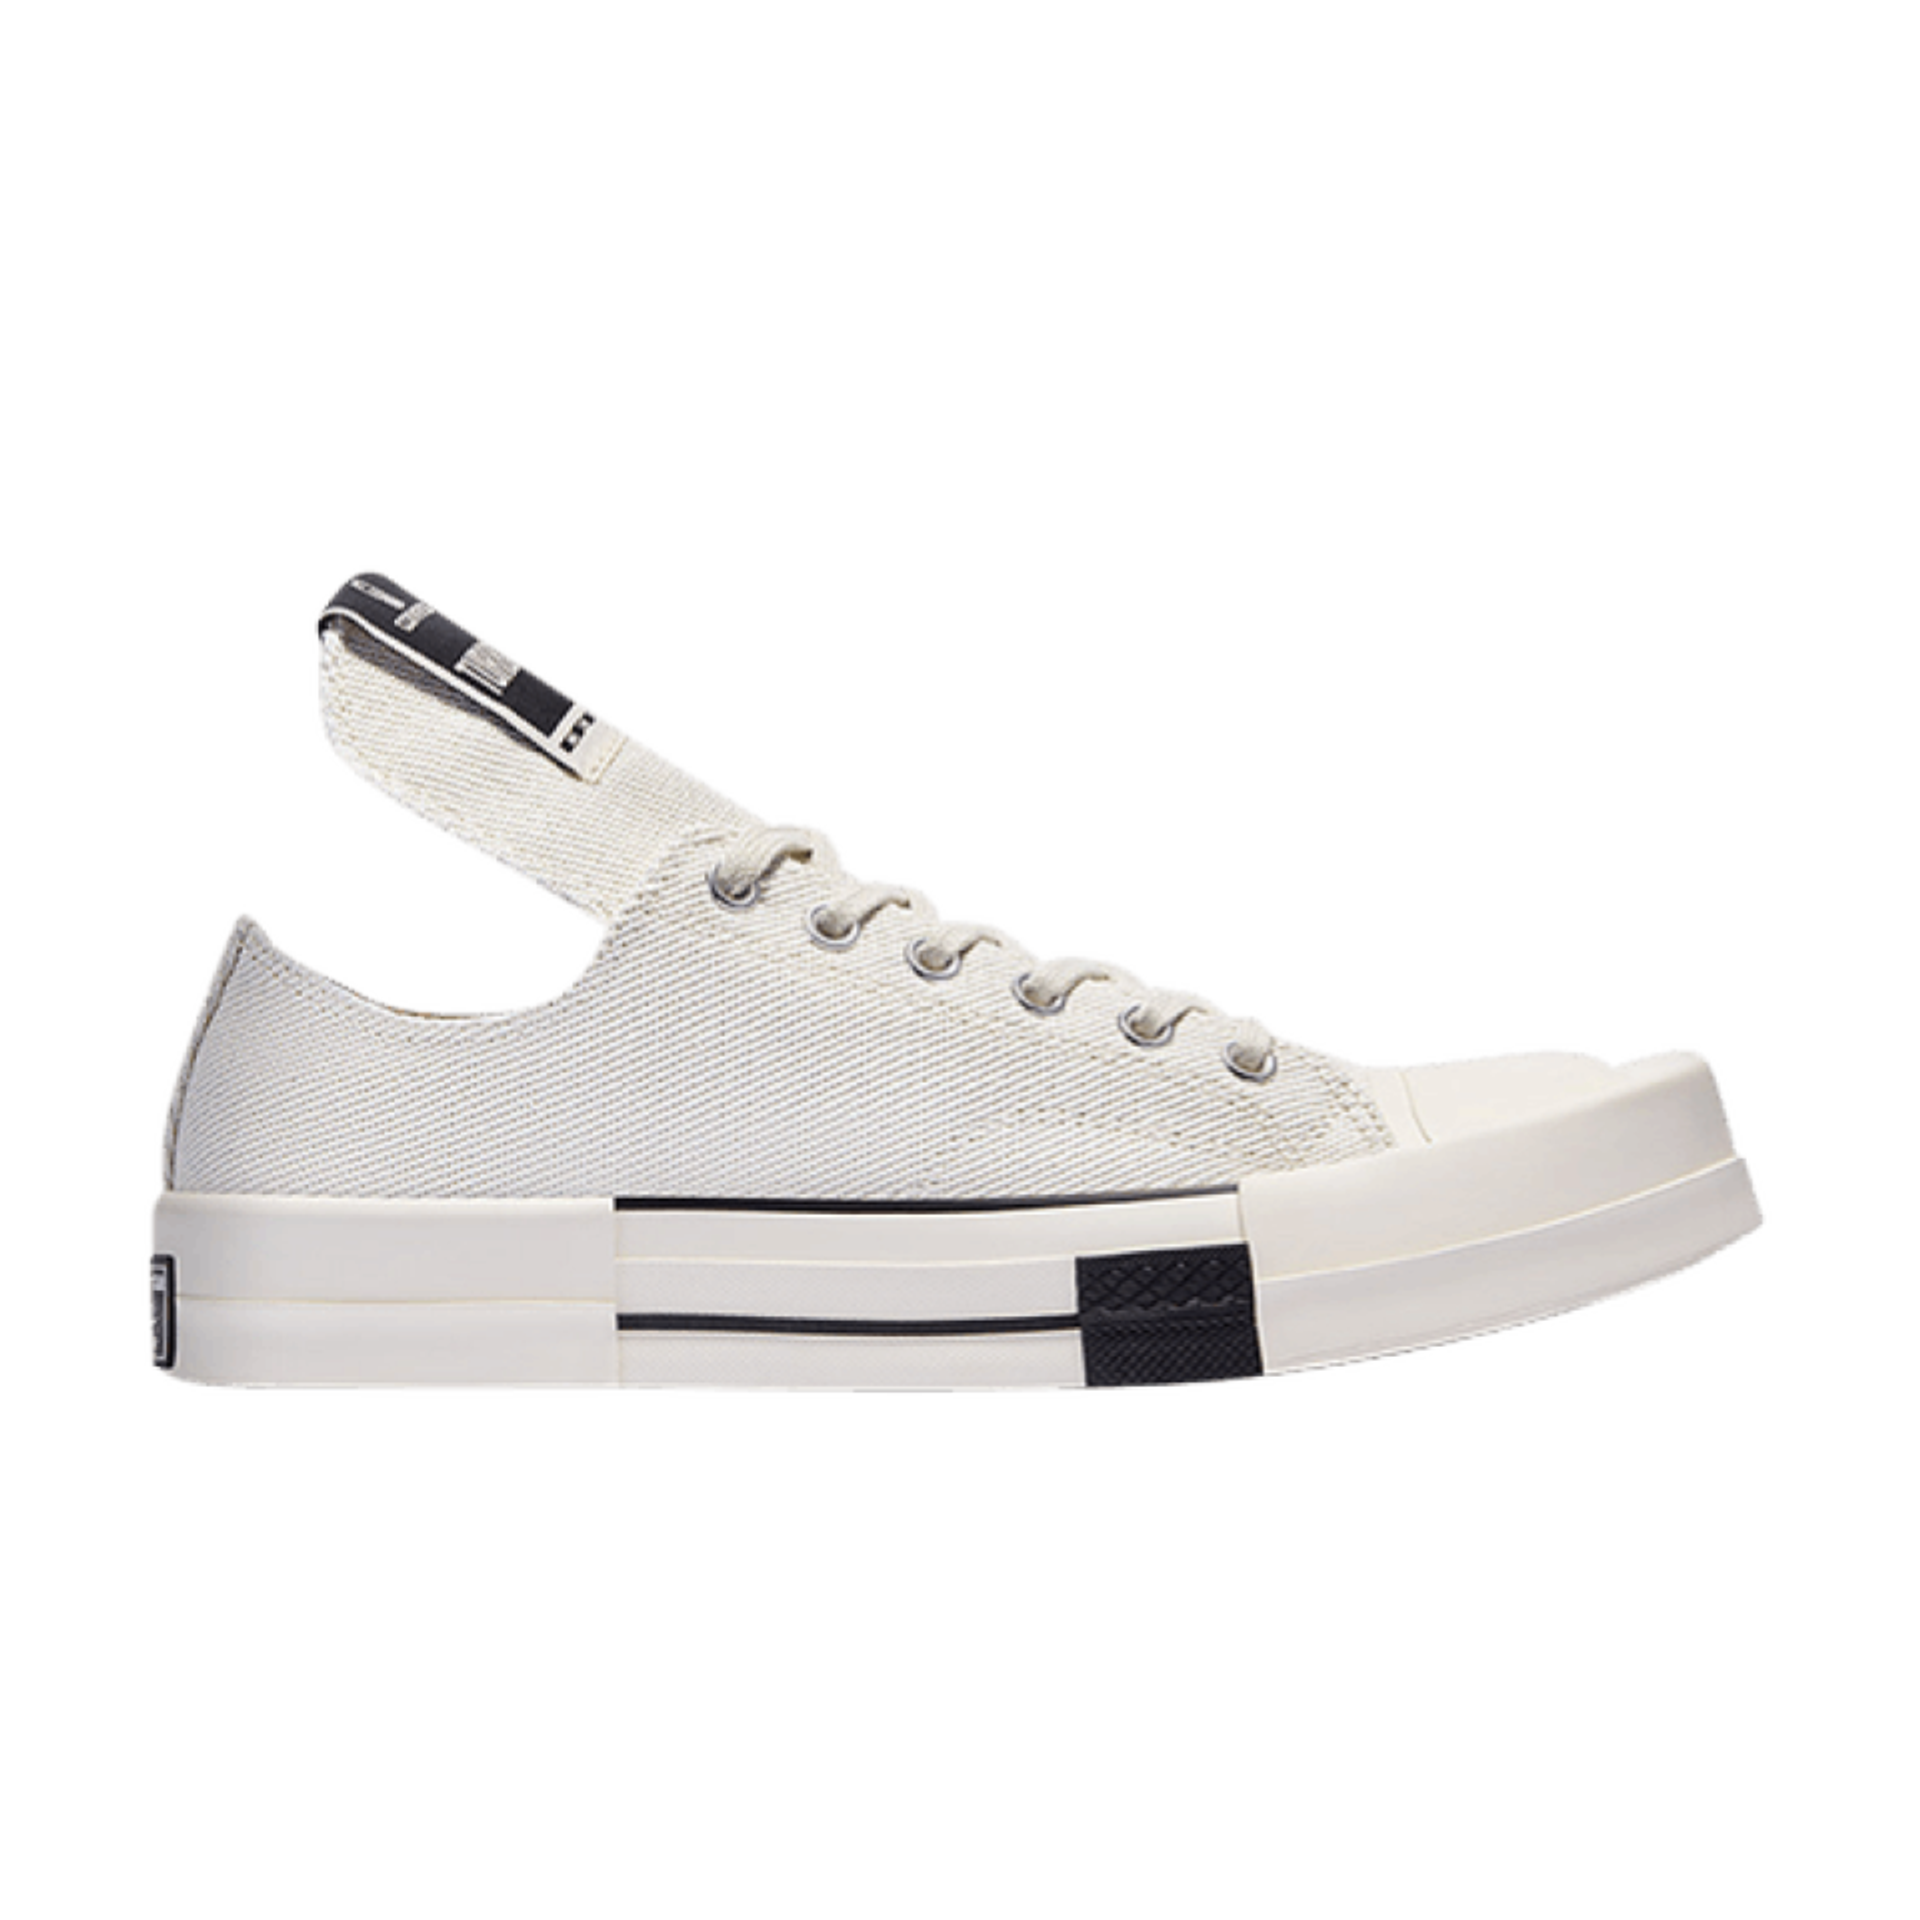 Converse Rick Owens x TURBODRK Chuck 70 Low 'Lily White'